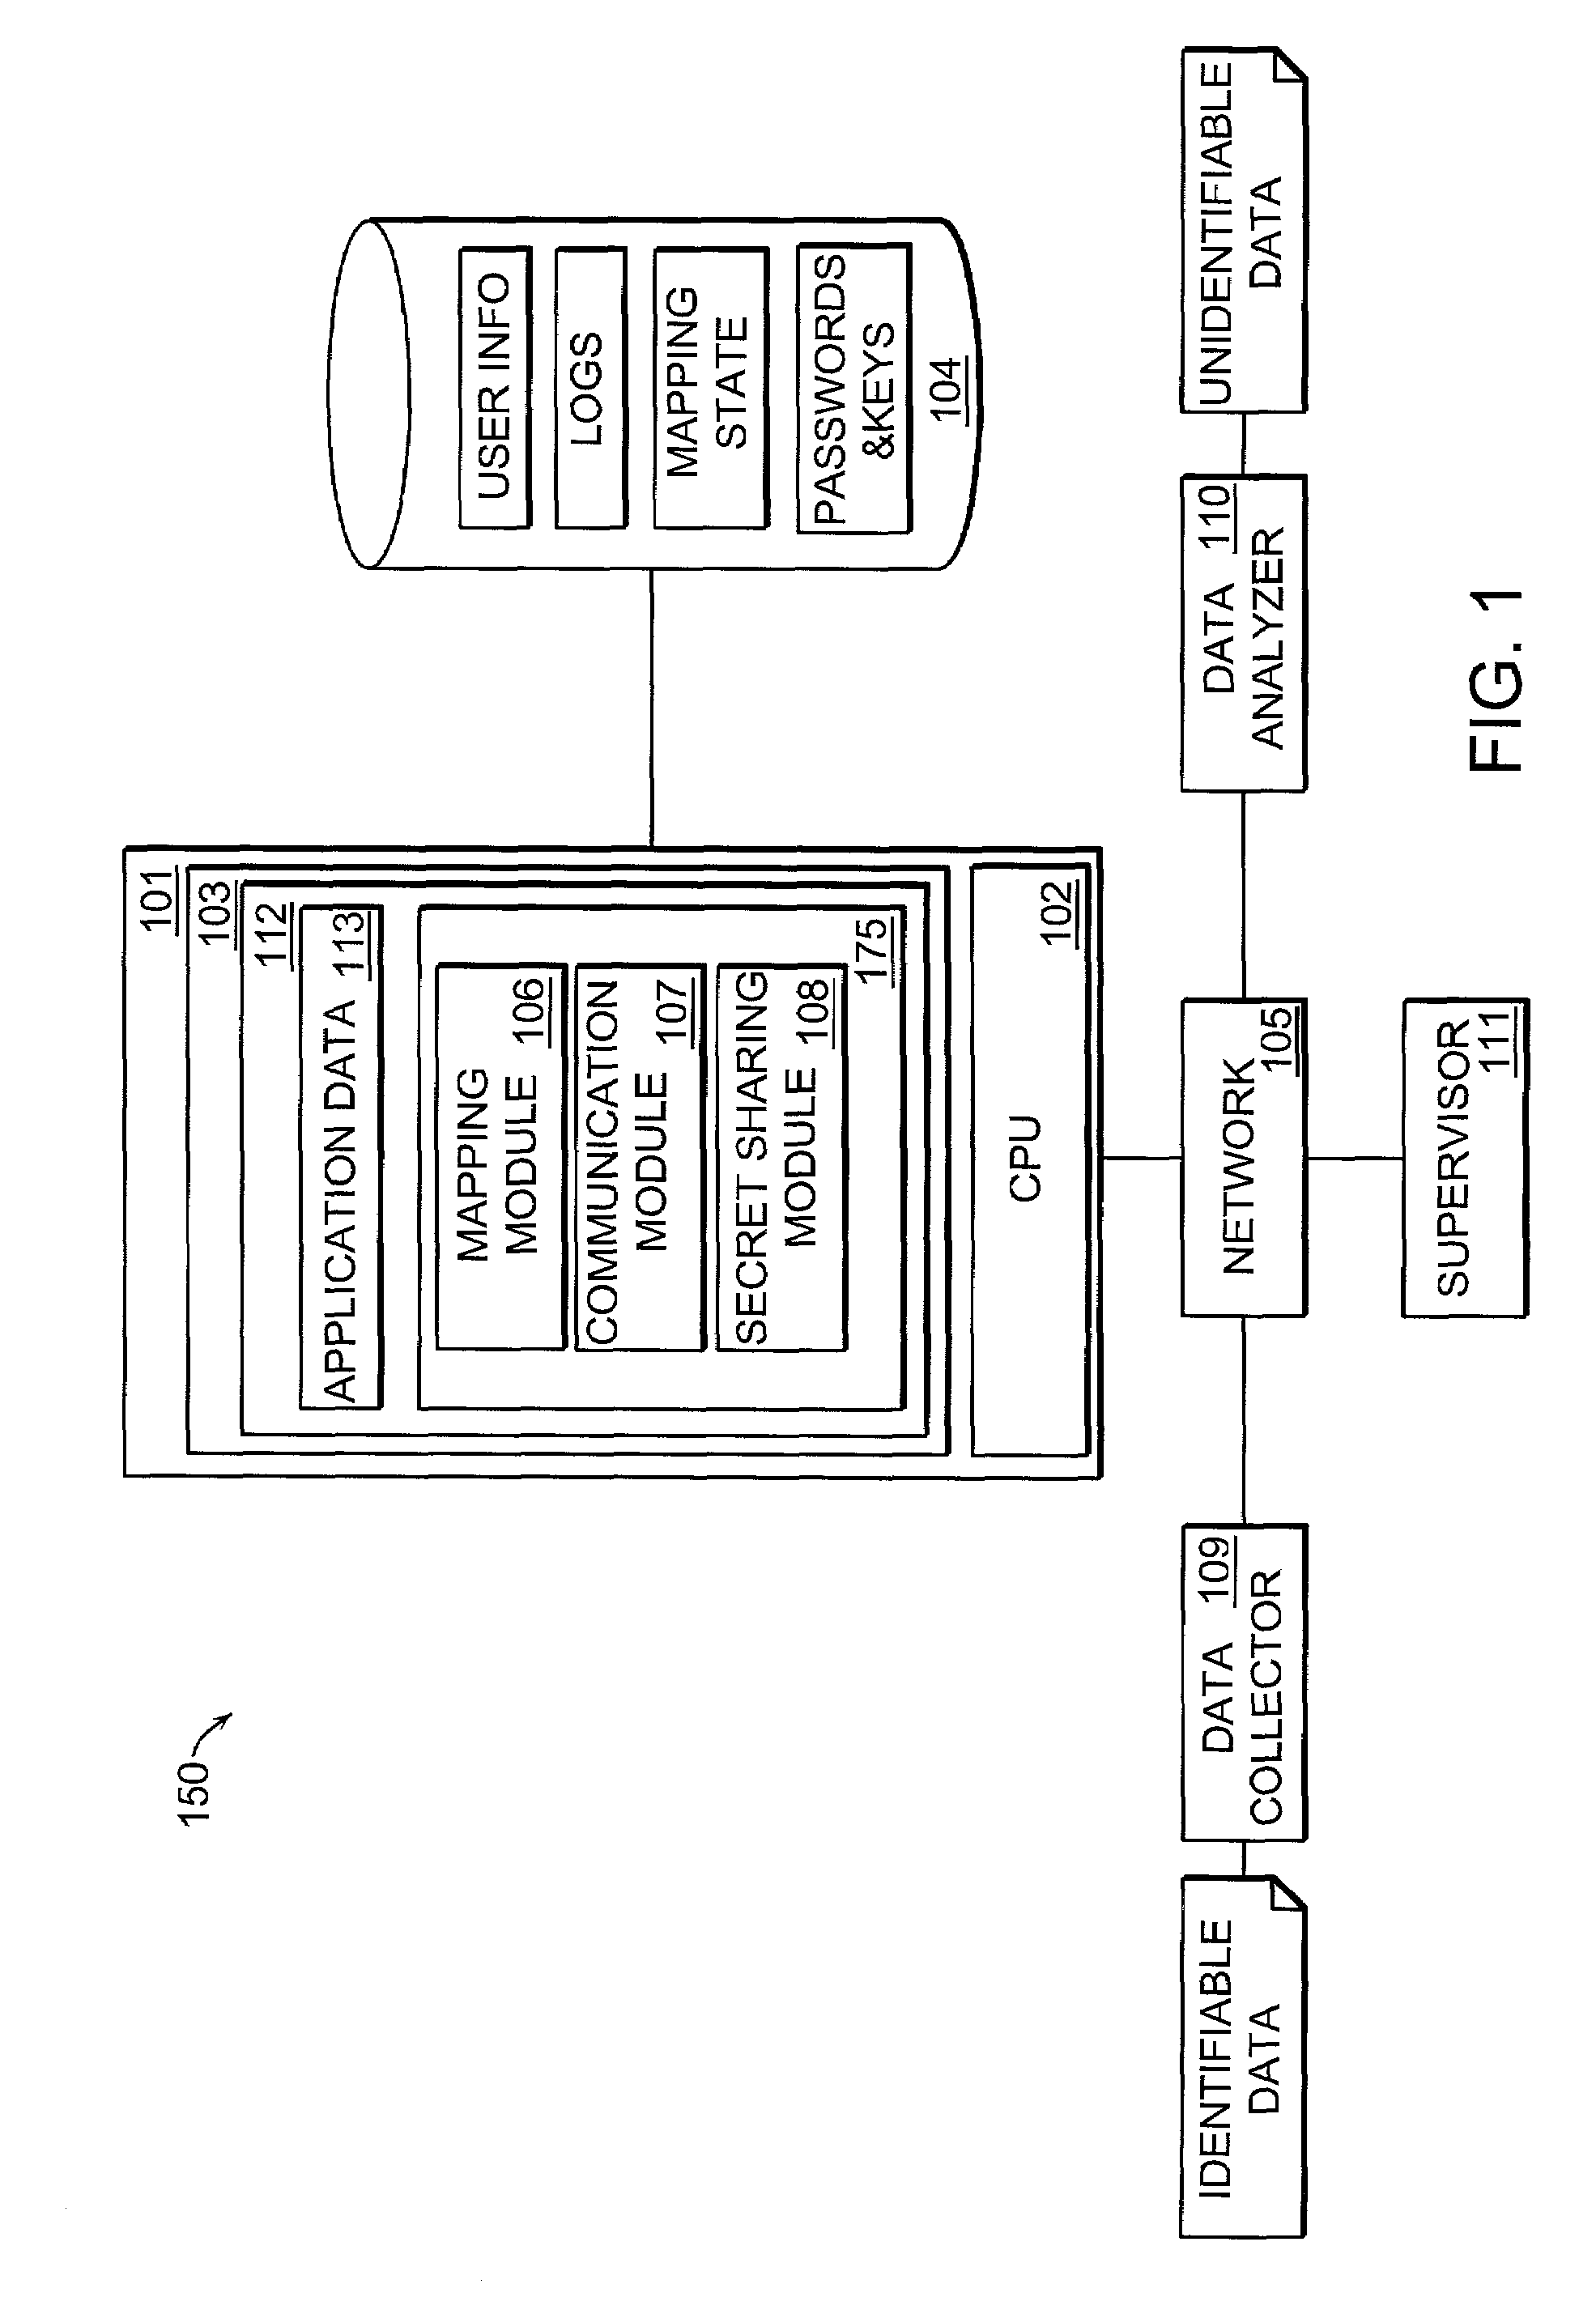 Automatic identity protection system with remote third party monitoring